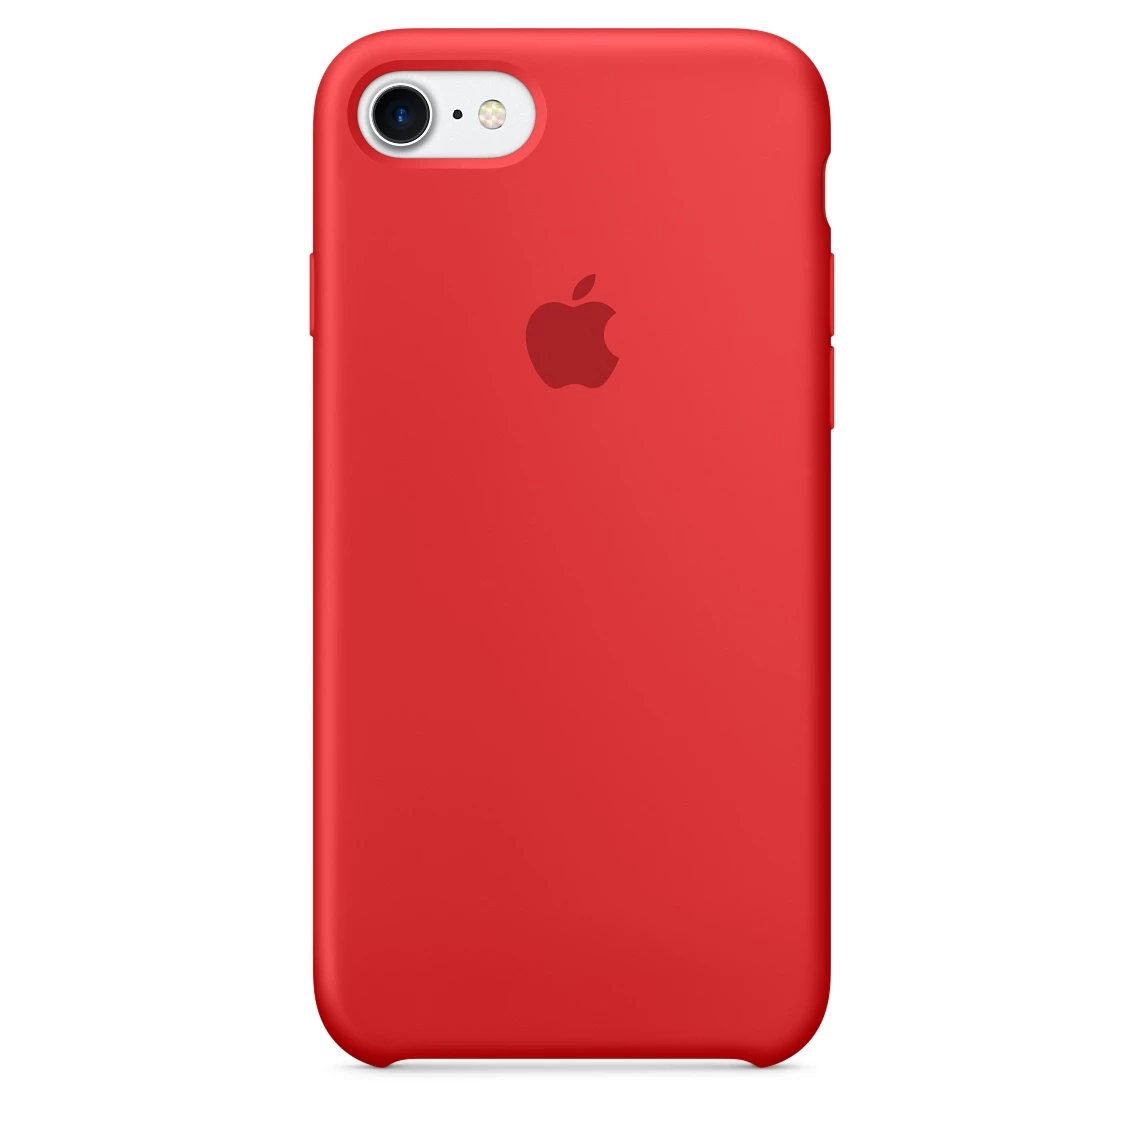 Apple iPhone 7/8/SE-2 Silicone Case LUX COPY - (PRODUCT)RED (MMWN2, MQGP2)